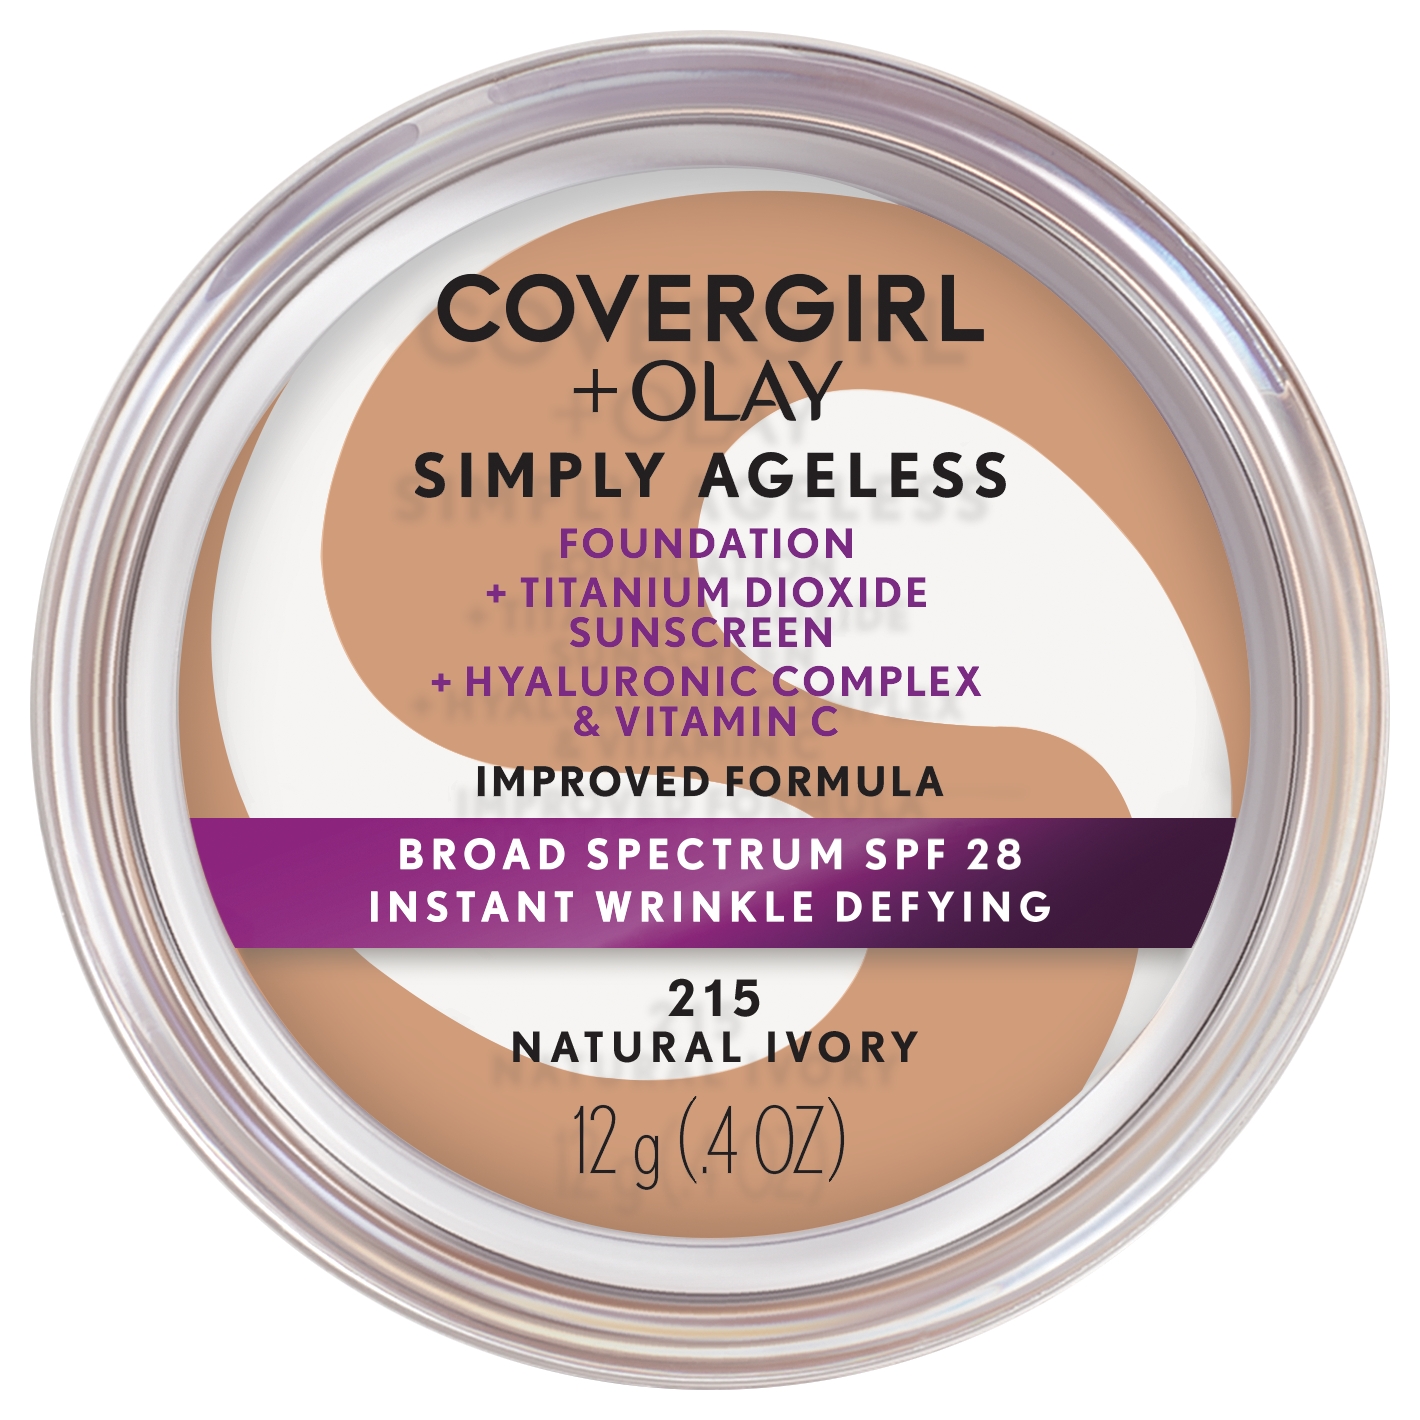 COVERGIRL + OLAY Simply Ageless Instant Wrinkle-Defying Foundation with SPF 28, Natural Ivory, 0.44 oz - image 1 of 9